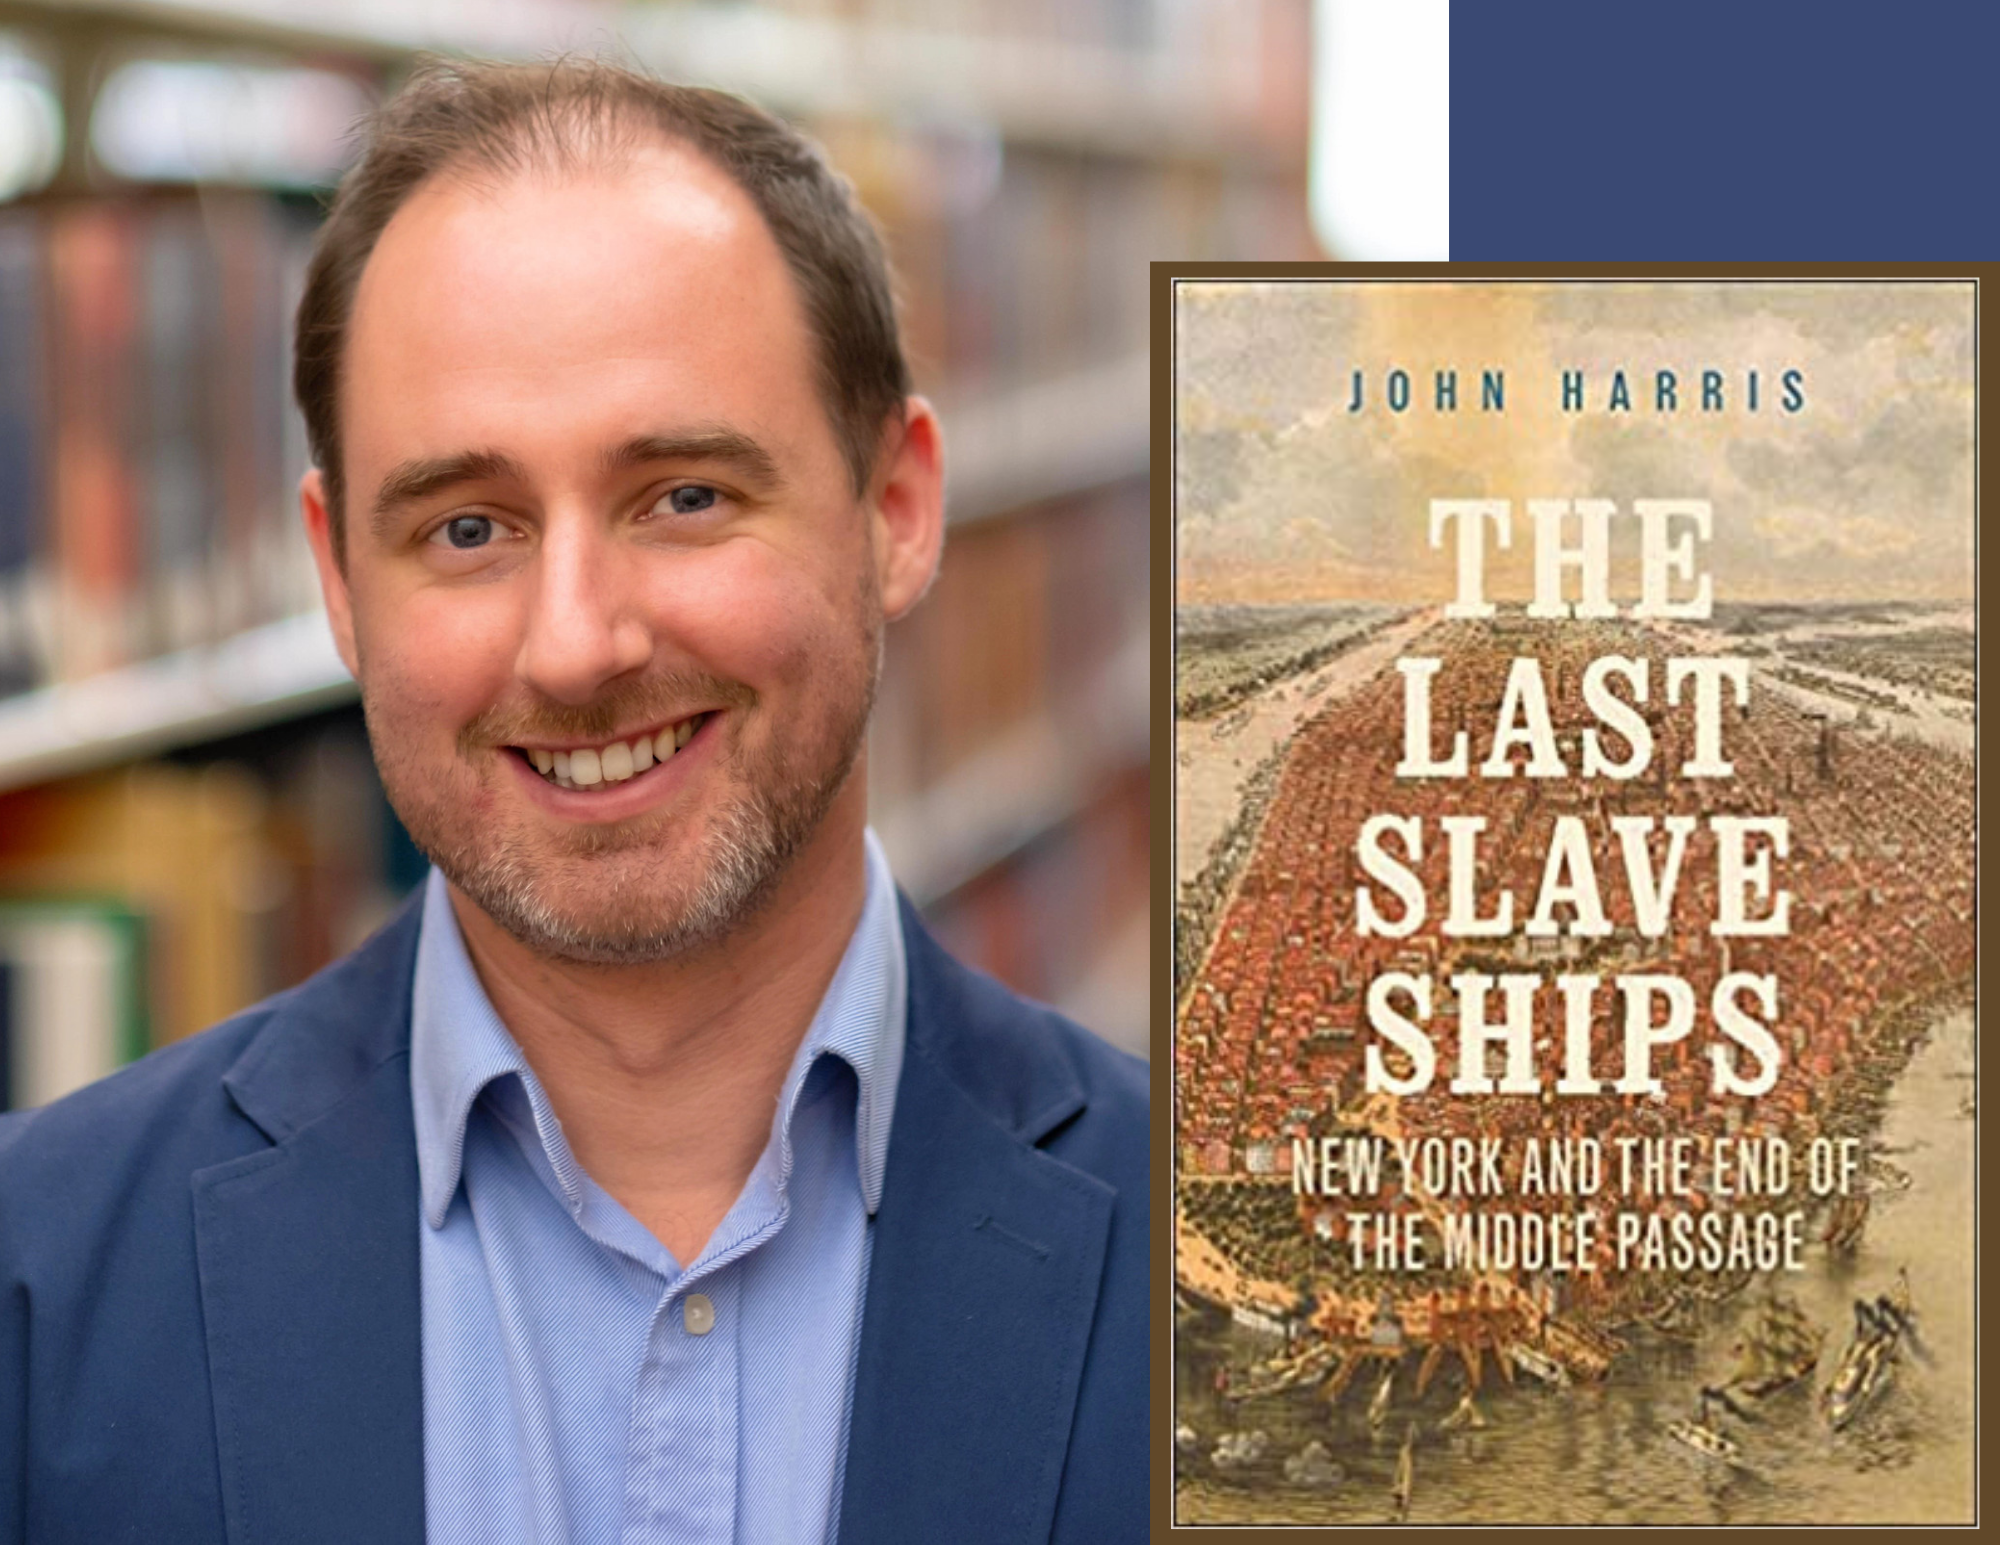 John Harris with book cover of The Last Slave Ships